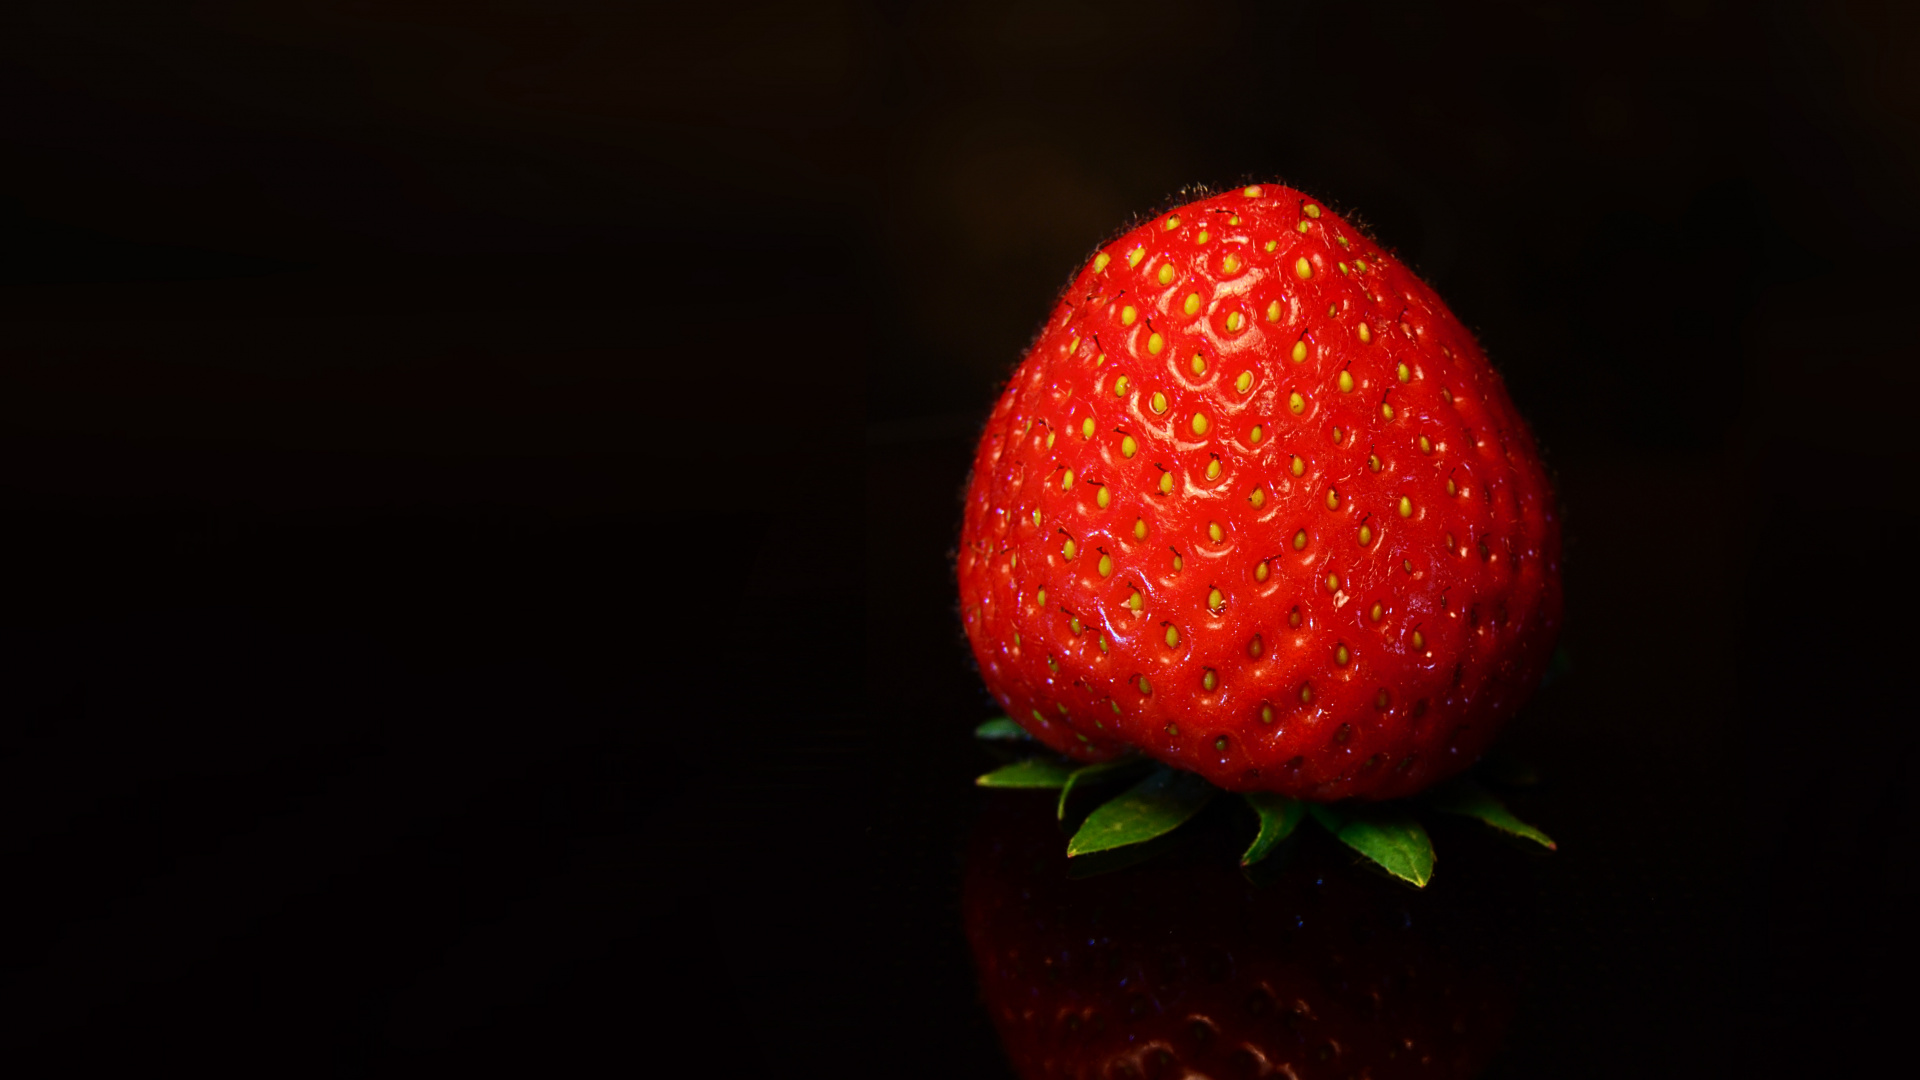 Red Strawberry Fruit in Close up Photography. Wallpaper in 1920x1080 Resolution